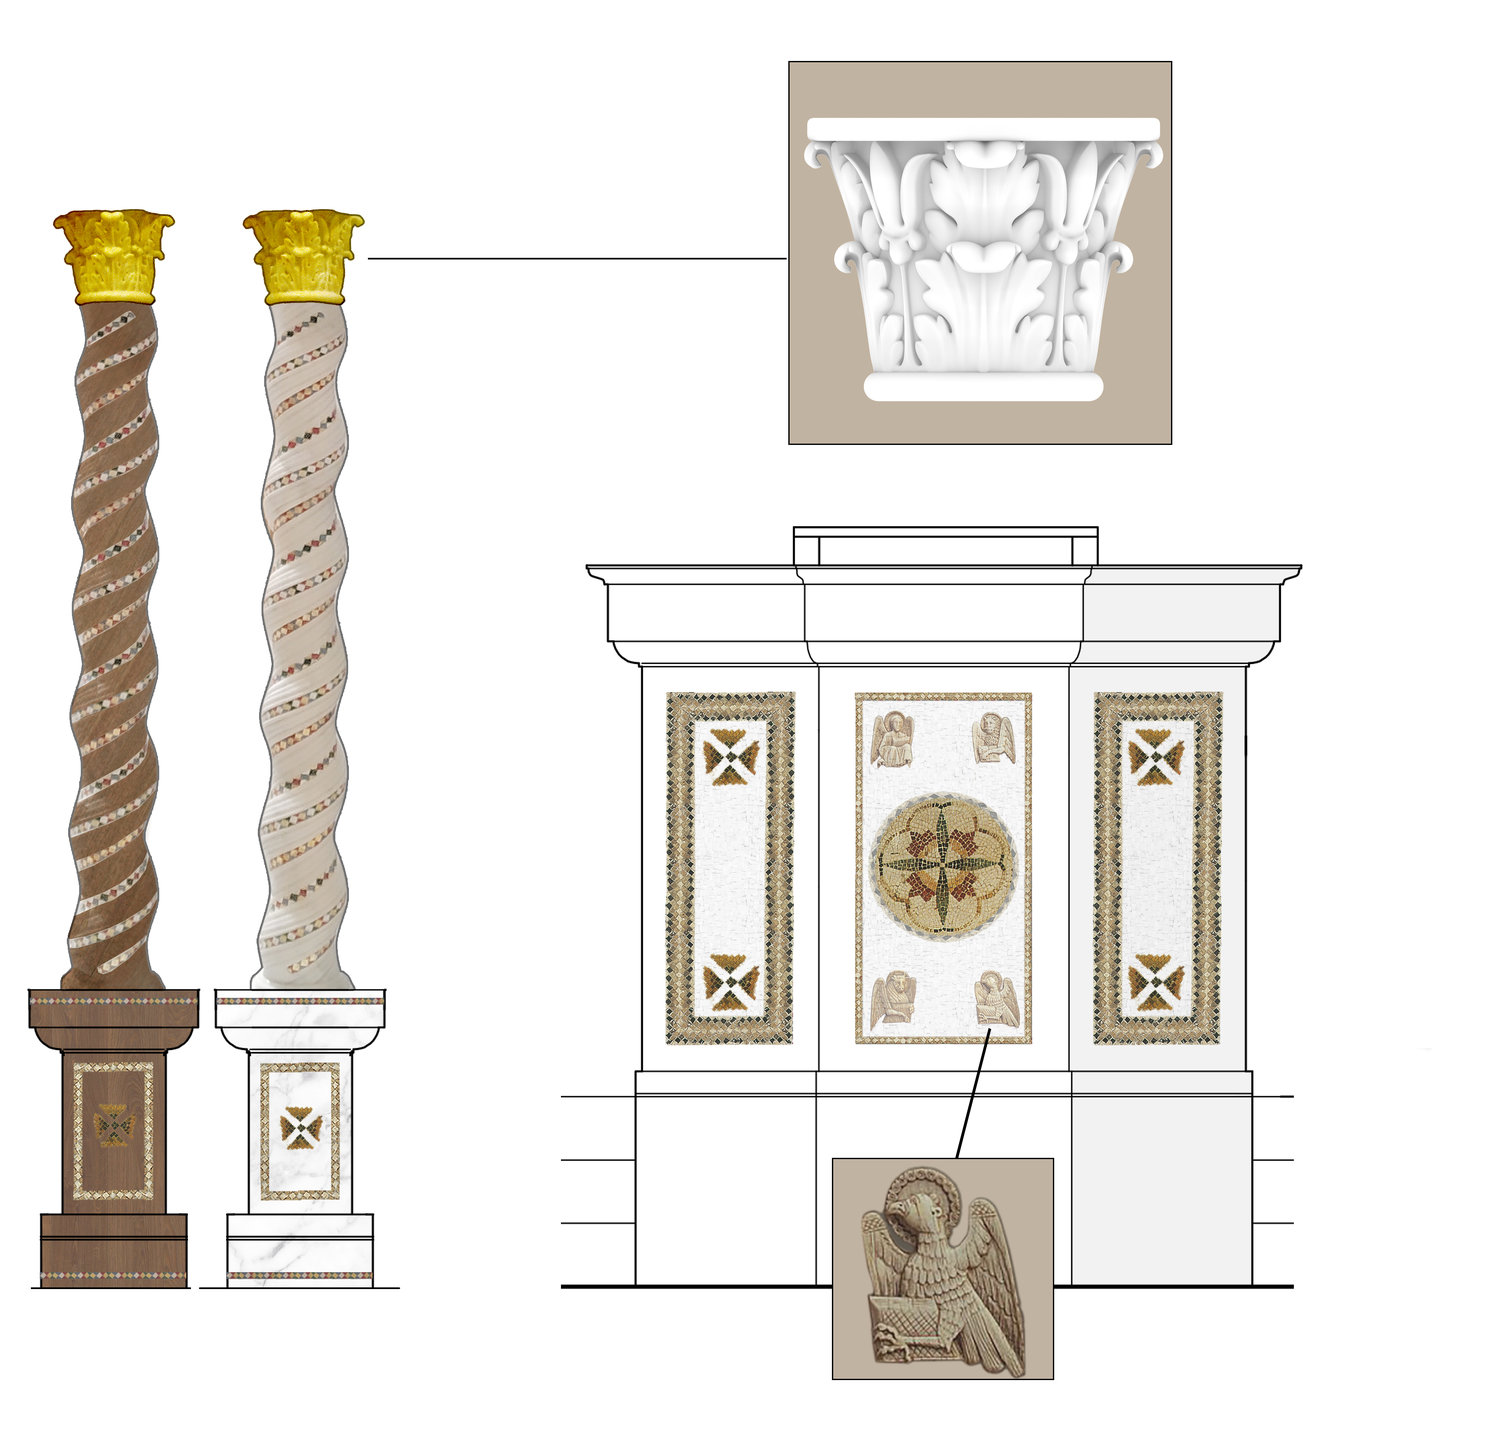 These are the latest renderings of the new ambo and stand for the paschal candle, which are being created for the Cathedral.